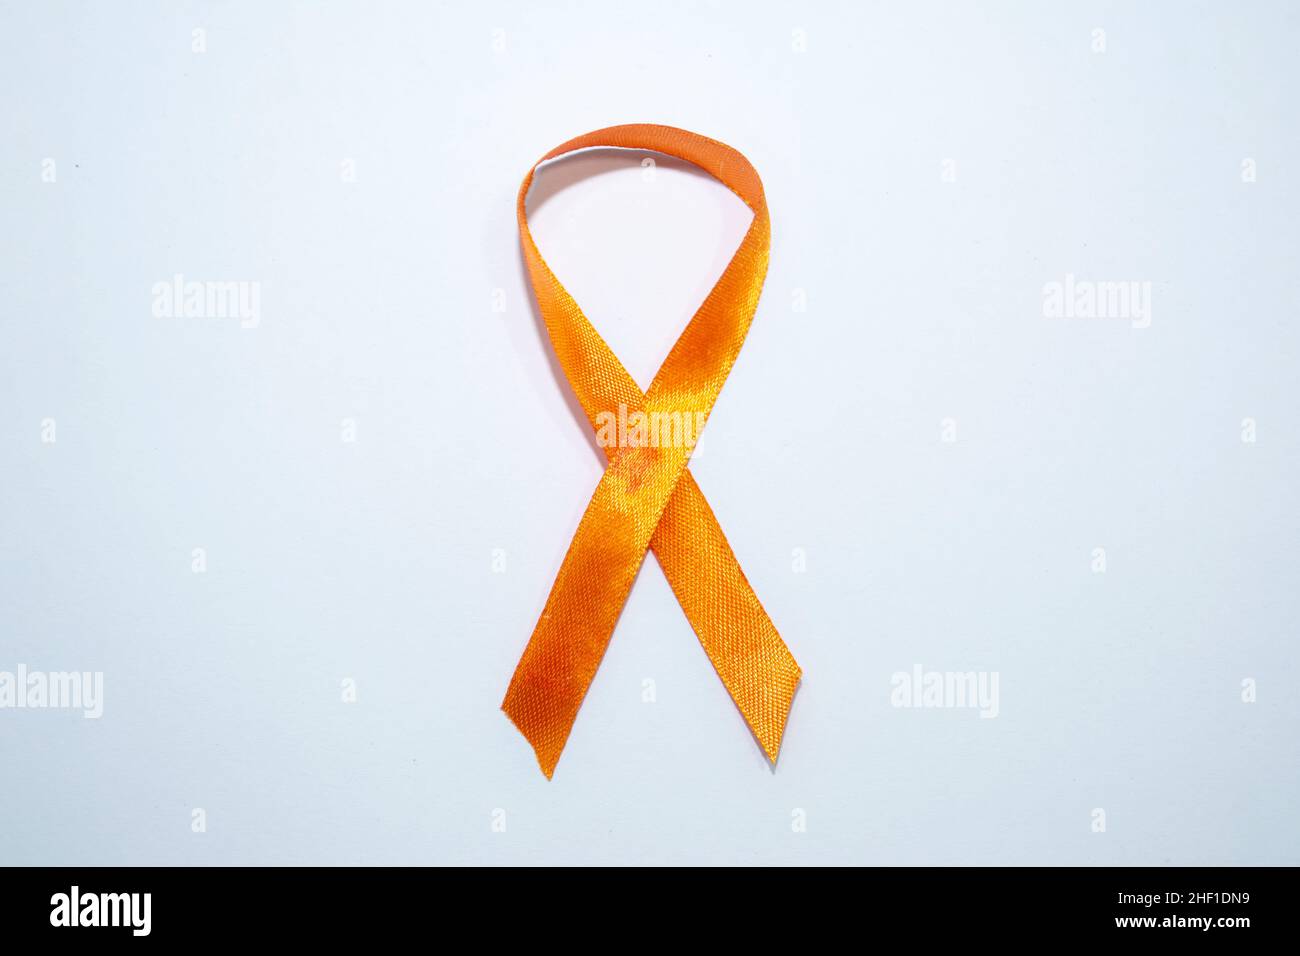 Orange ribbon as a symbol of Animal Abuse, leukemia awareness, kidney cancer association, multiple sclerosis with copy space. Stock Photo